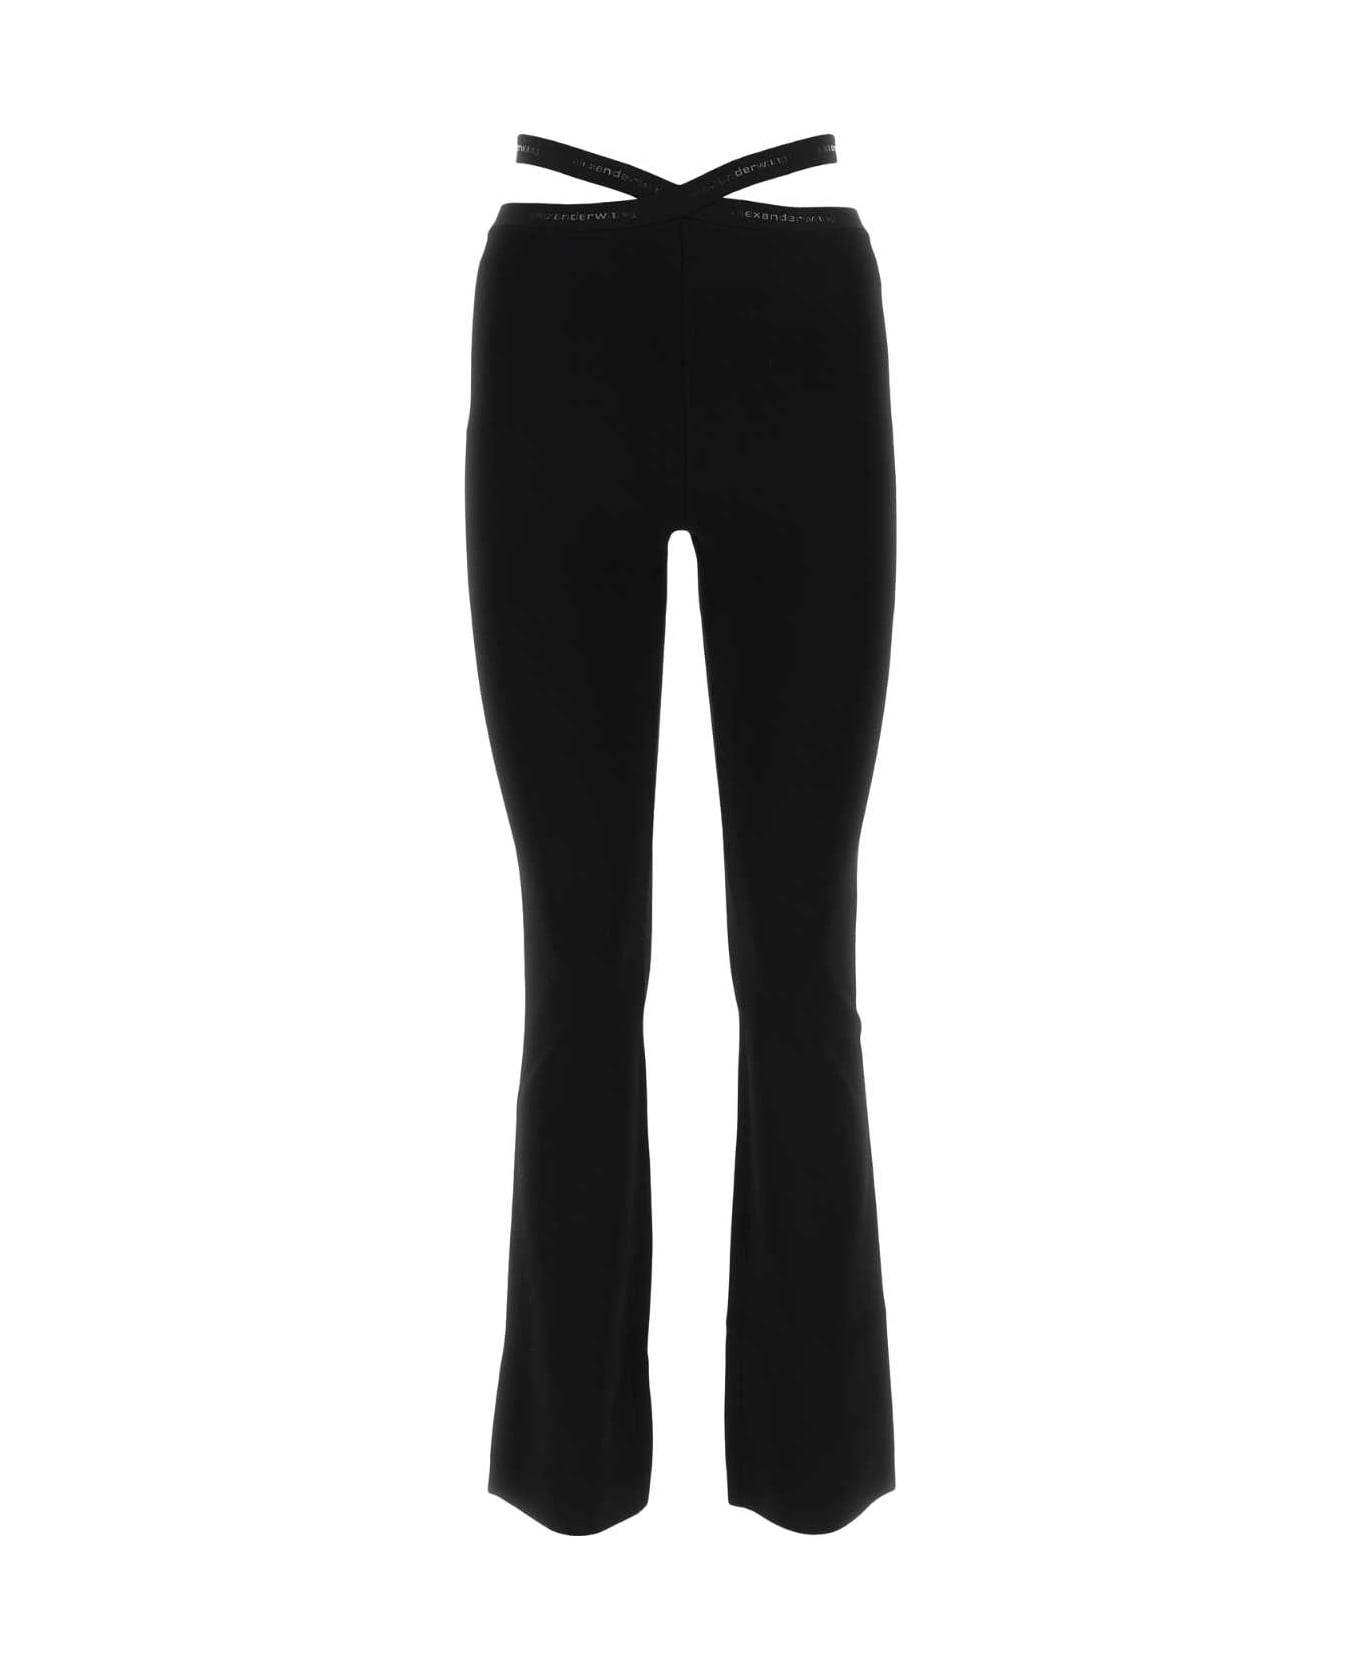 T by Alexander Wang Black Stretch Viscose Blend Pant - 001 ボトムス